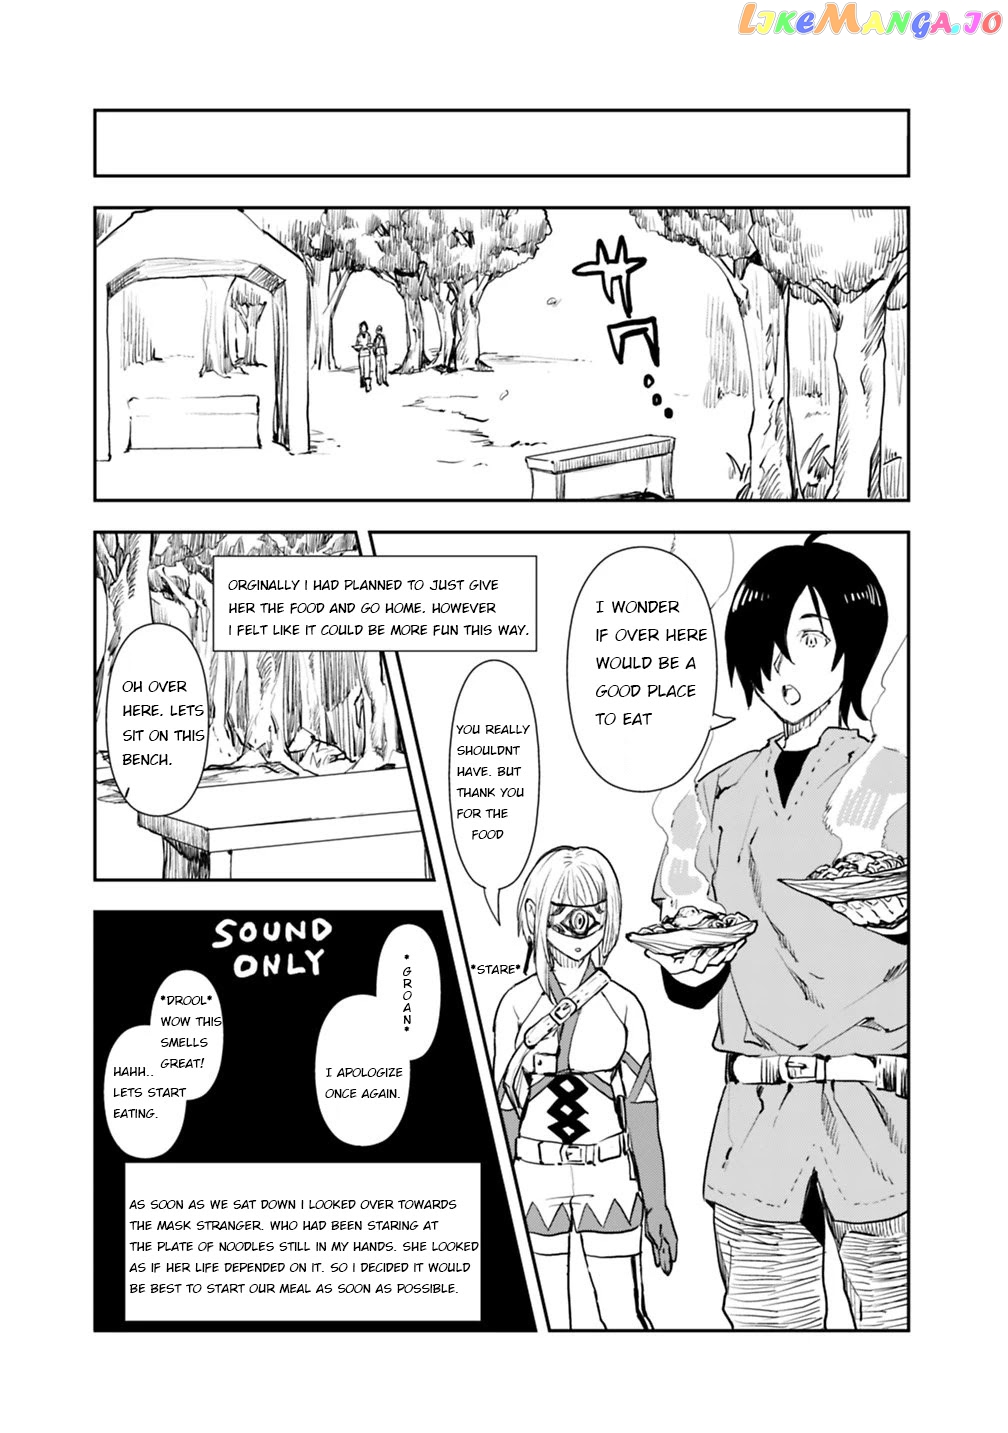 I Came To Another World As A Jack Of All Trades And A Master Of None To Journey While Relying On Quickness chapter 2 - page 4